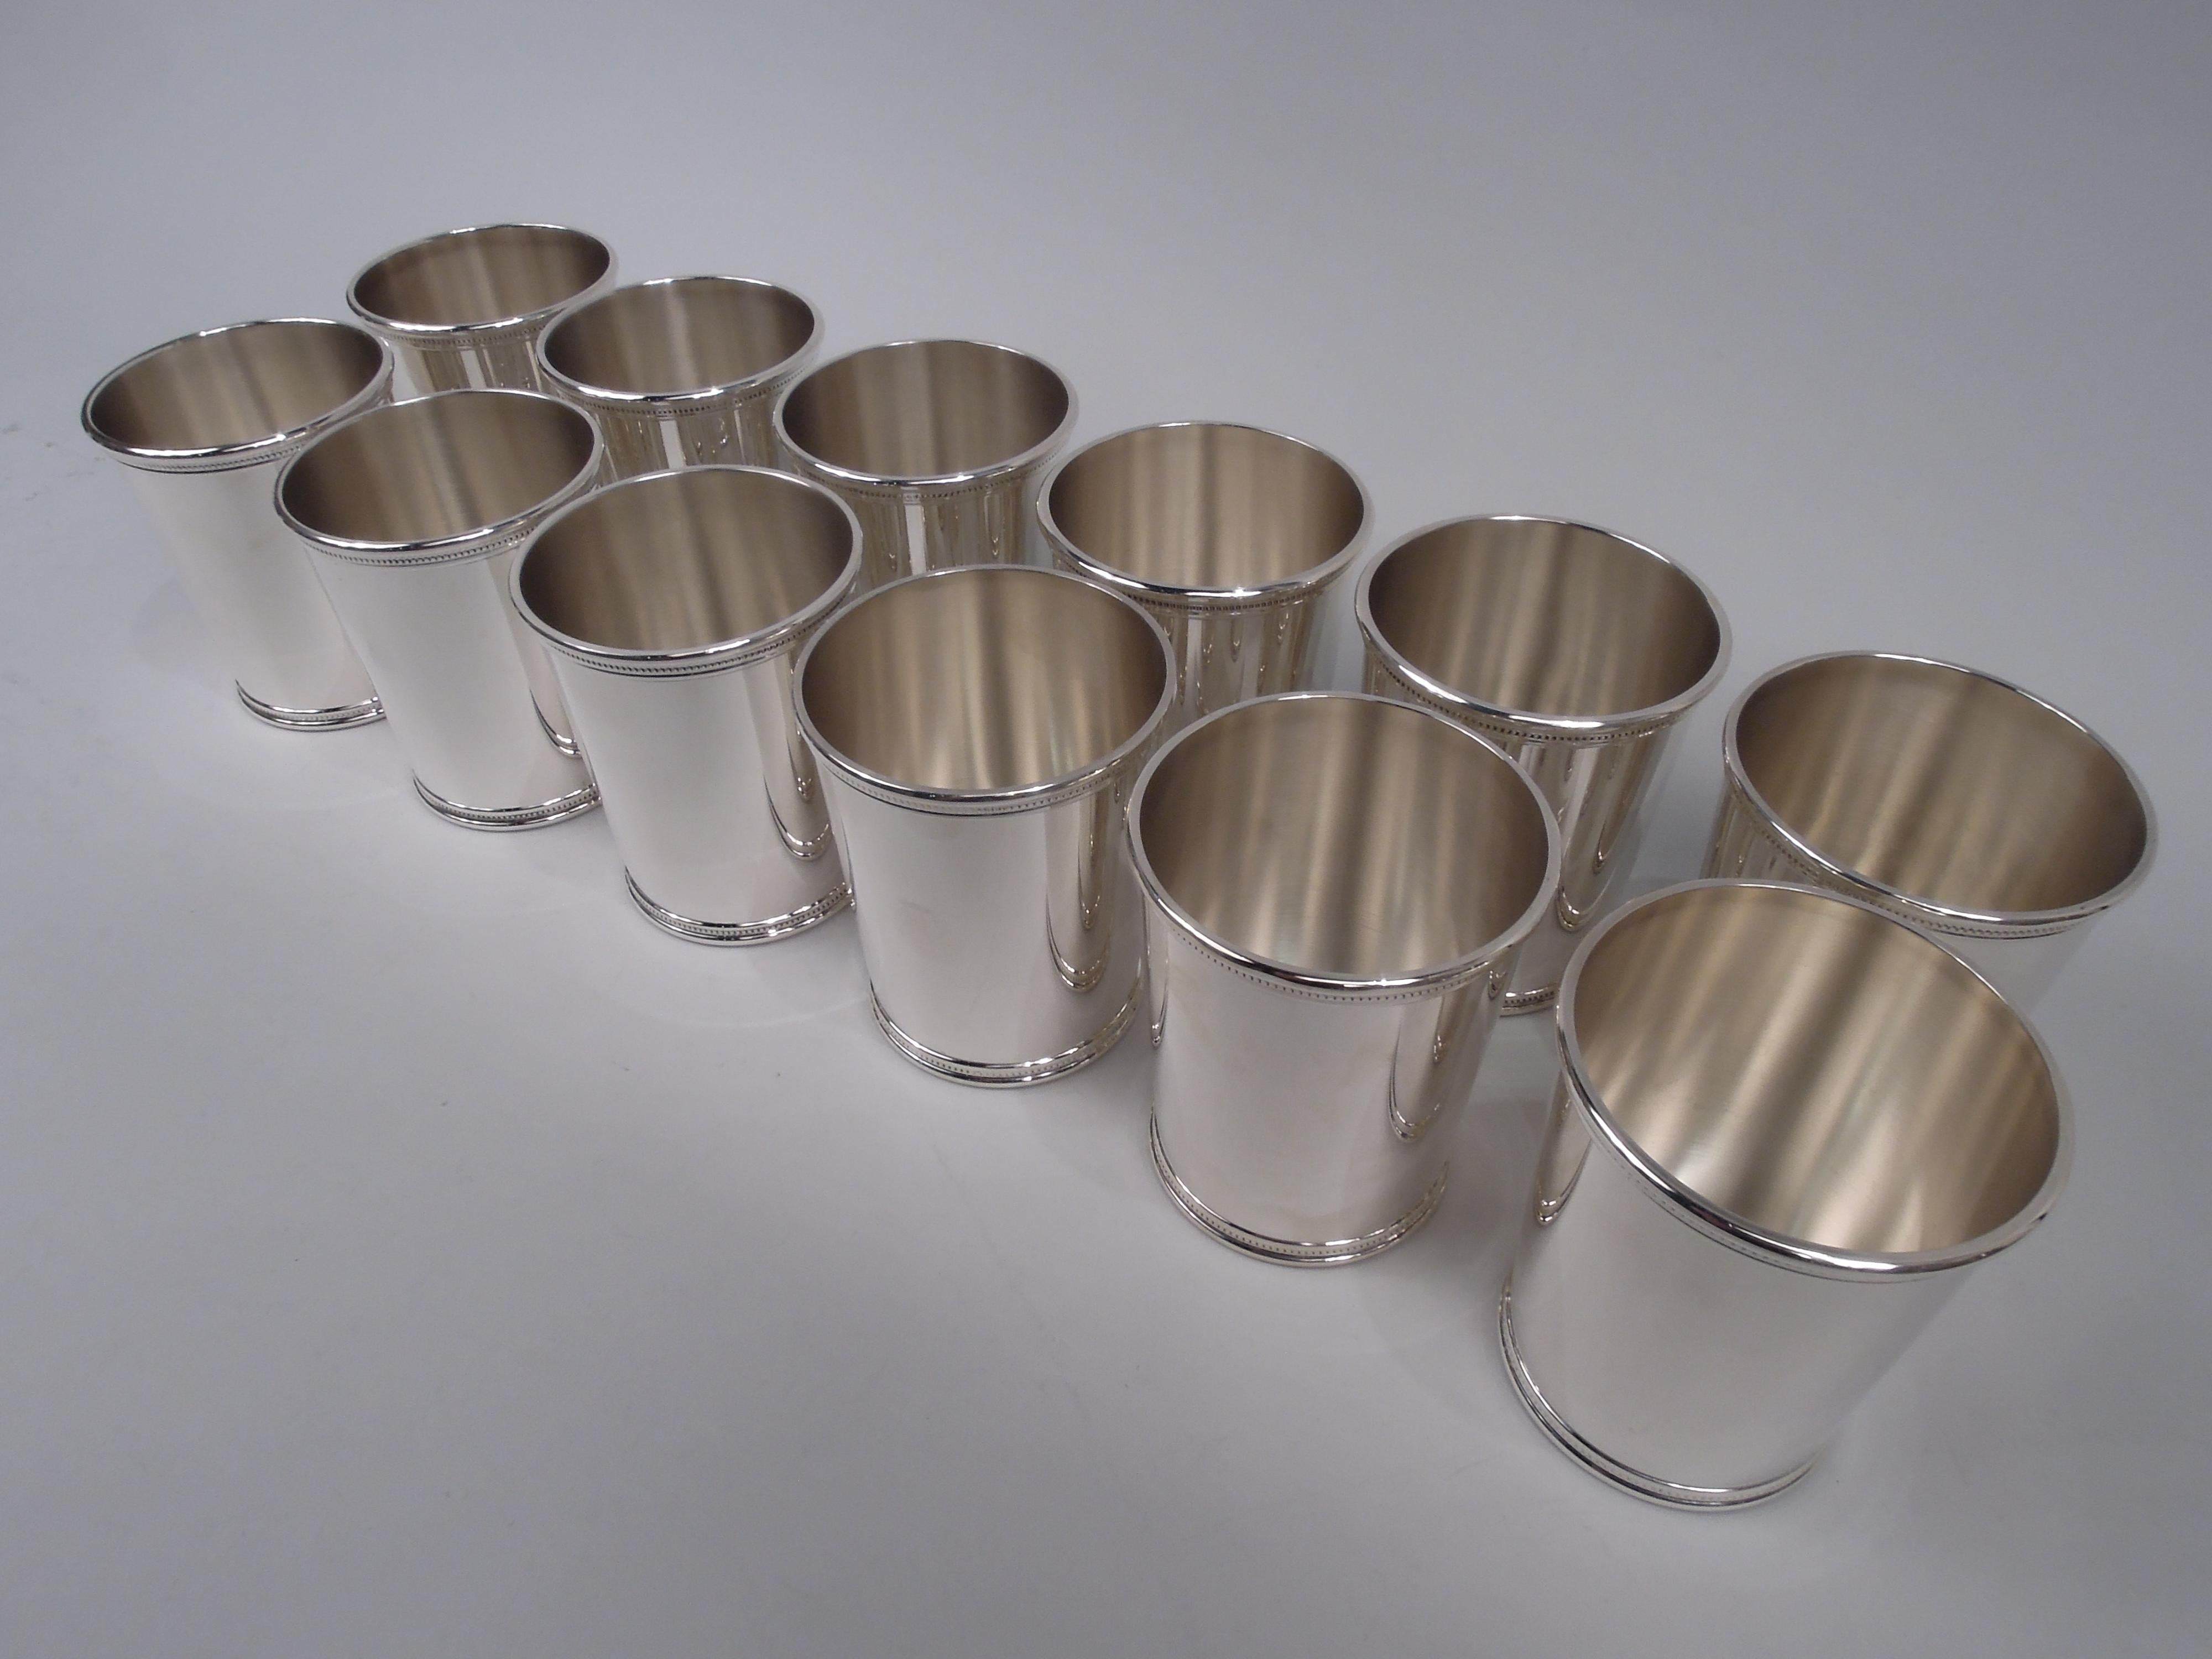 Twelve sterling silver mint juleps. Made by Scearce in Shelbyville, Kentucky. Each: Straight and tapering sides, and beaded and molded rim and foot. A great Nixon-era set comprising 8 cups from the Silent Majority first term and 4 from the embattled